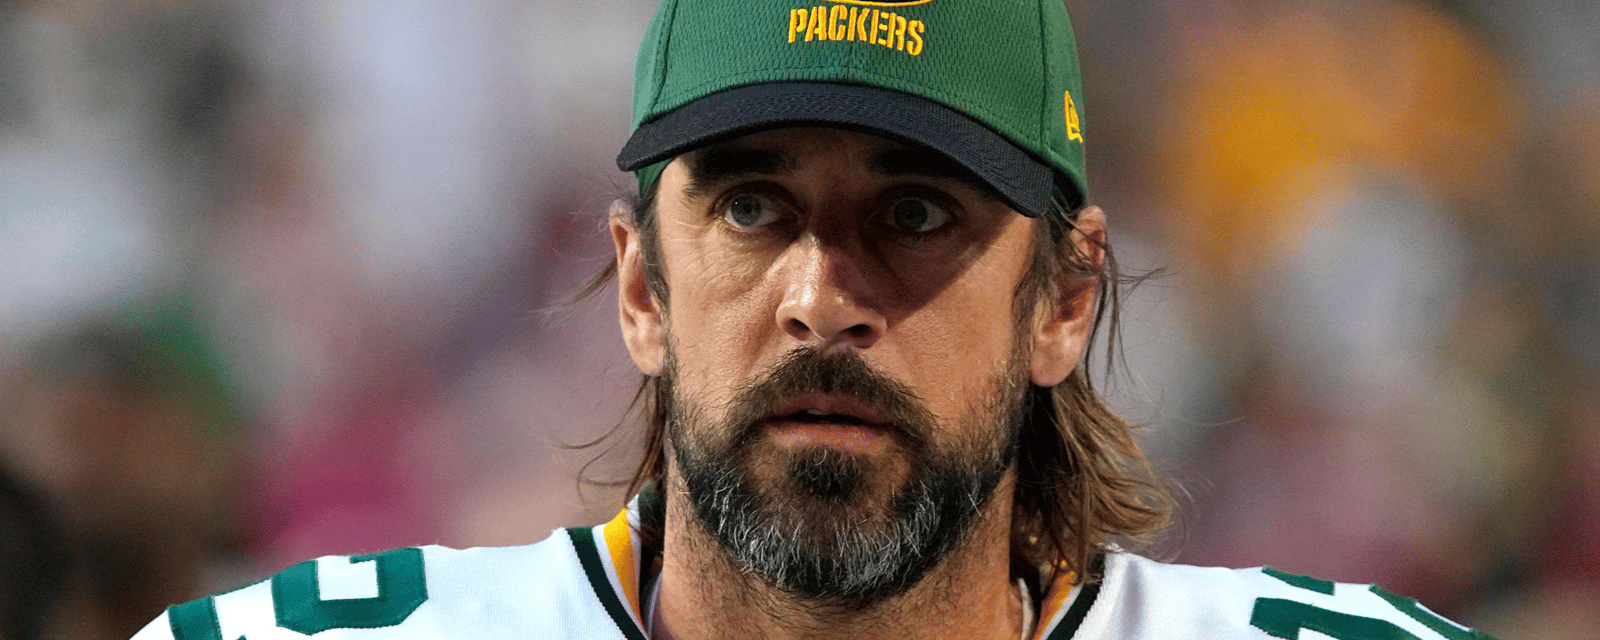 Ex-Packer: Aaron Rodgers asked if I believed in 9/11